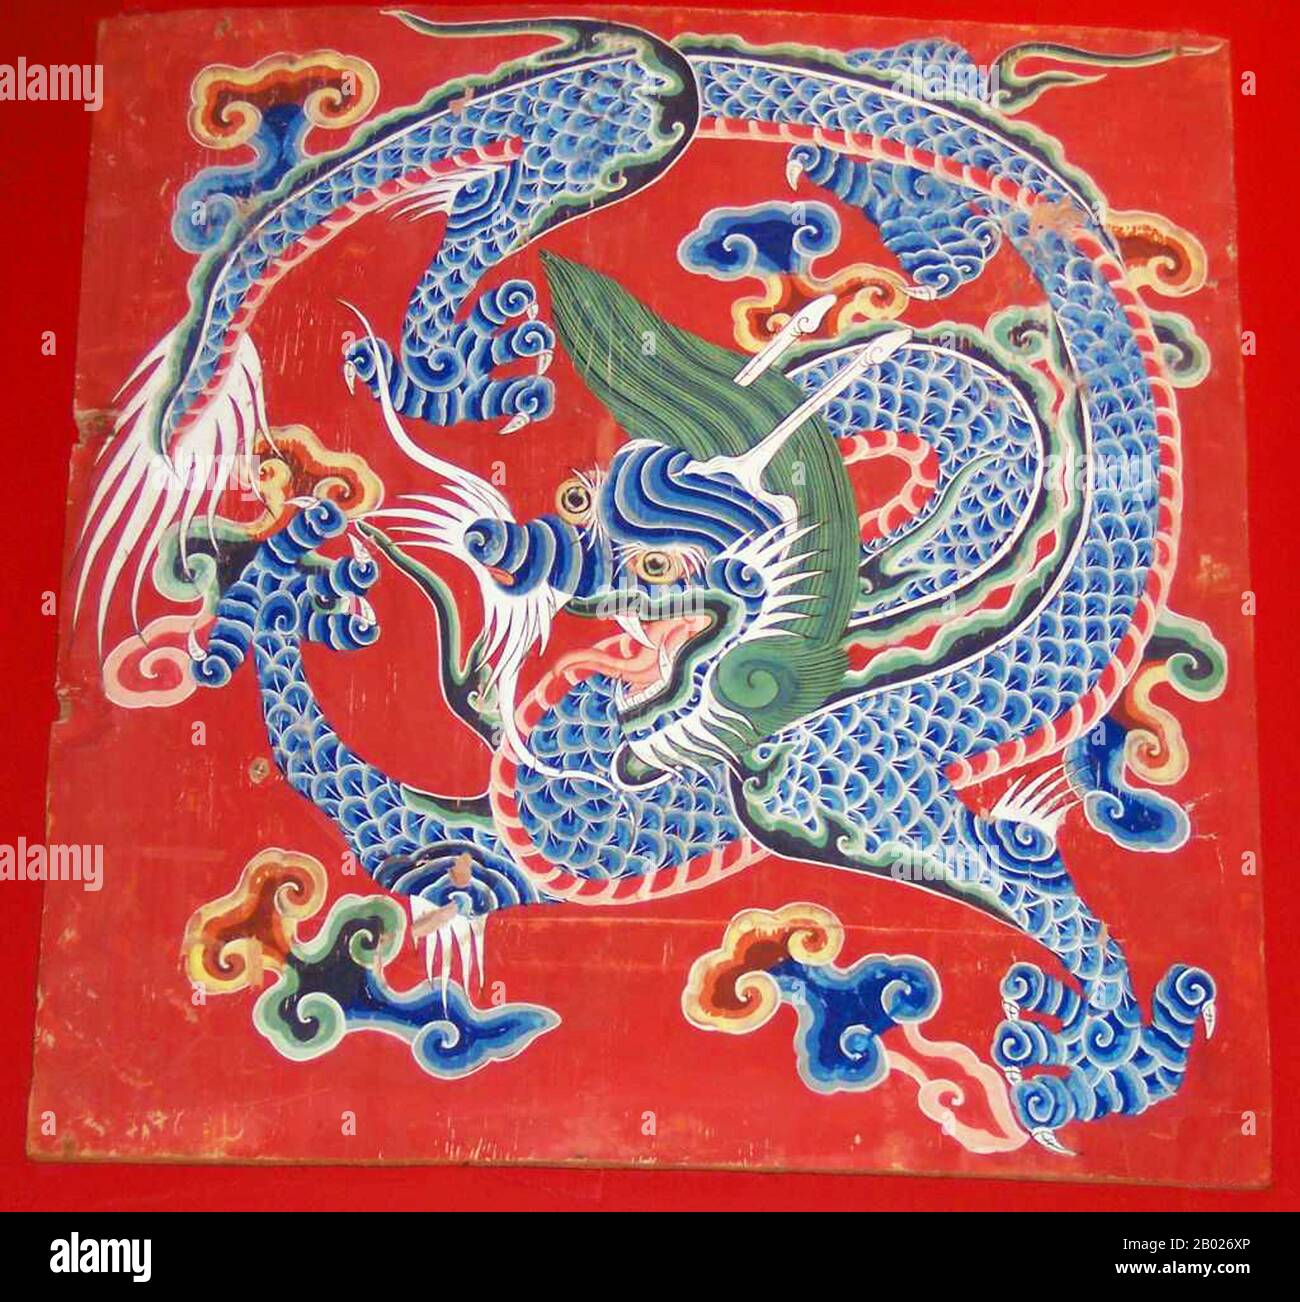 The dragon exists in Tibetan mythology either as a wood dragon or, more usually, in its more spectacular form as a thunder dragon. It is often portrayed in flight on Tibetan rugs and carpets with a depiction of stylized clouds. They are called brug or thunder dragons. Stock Photo